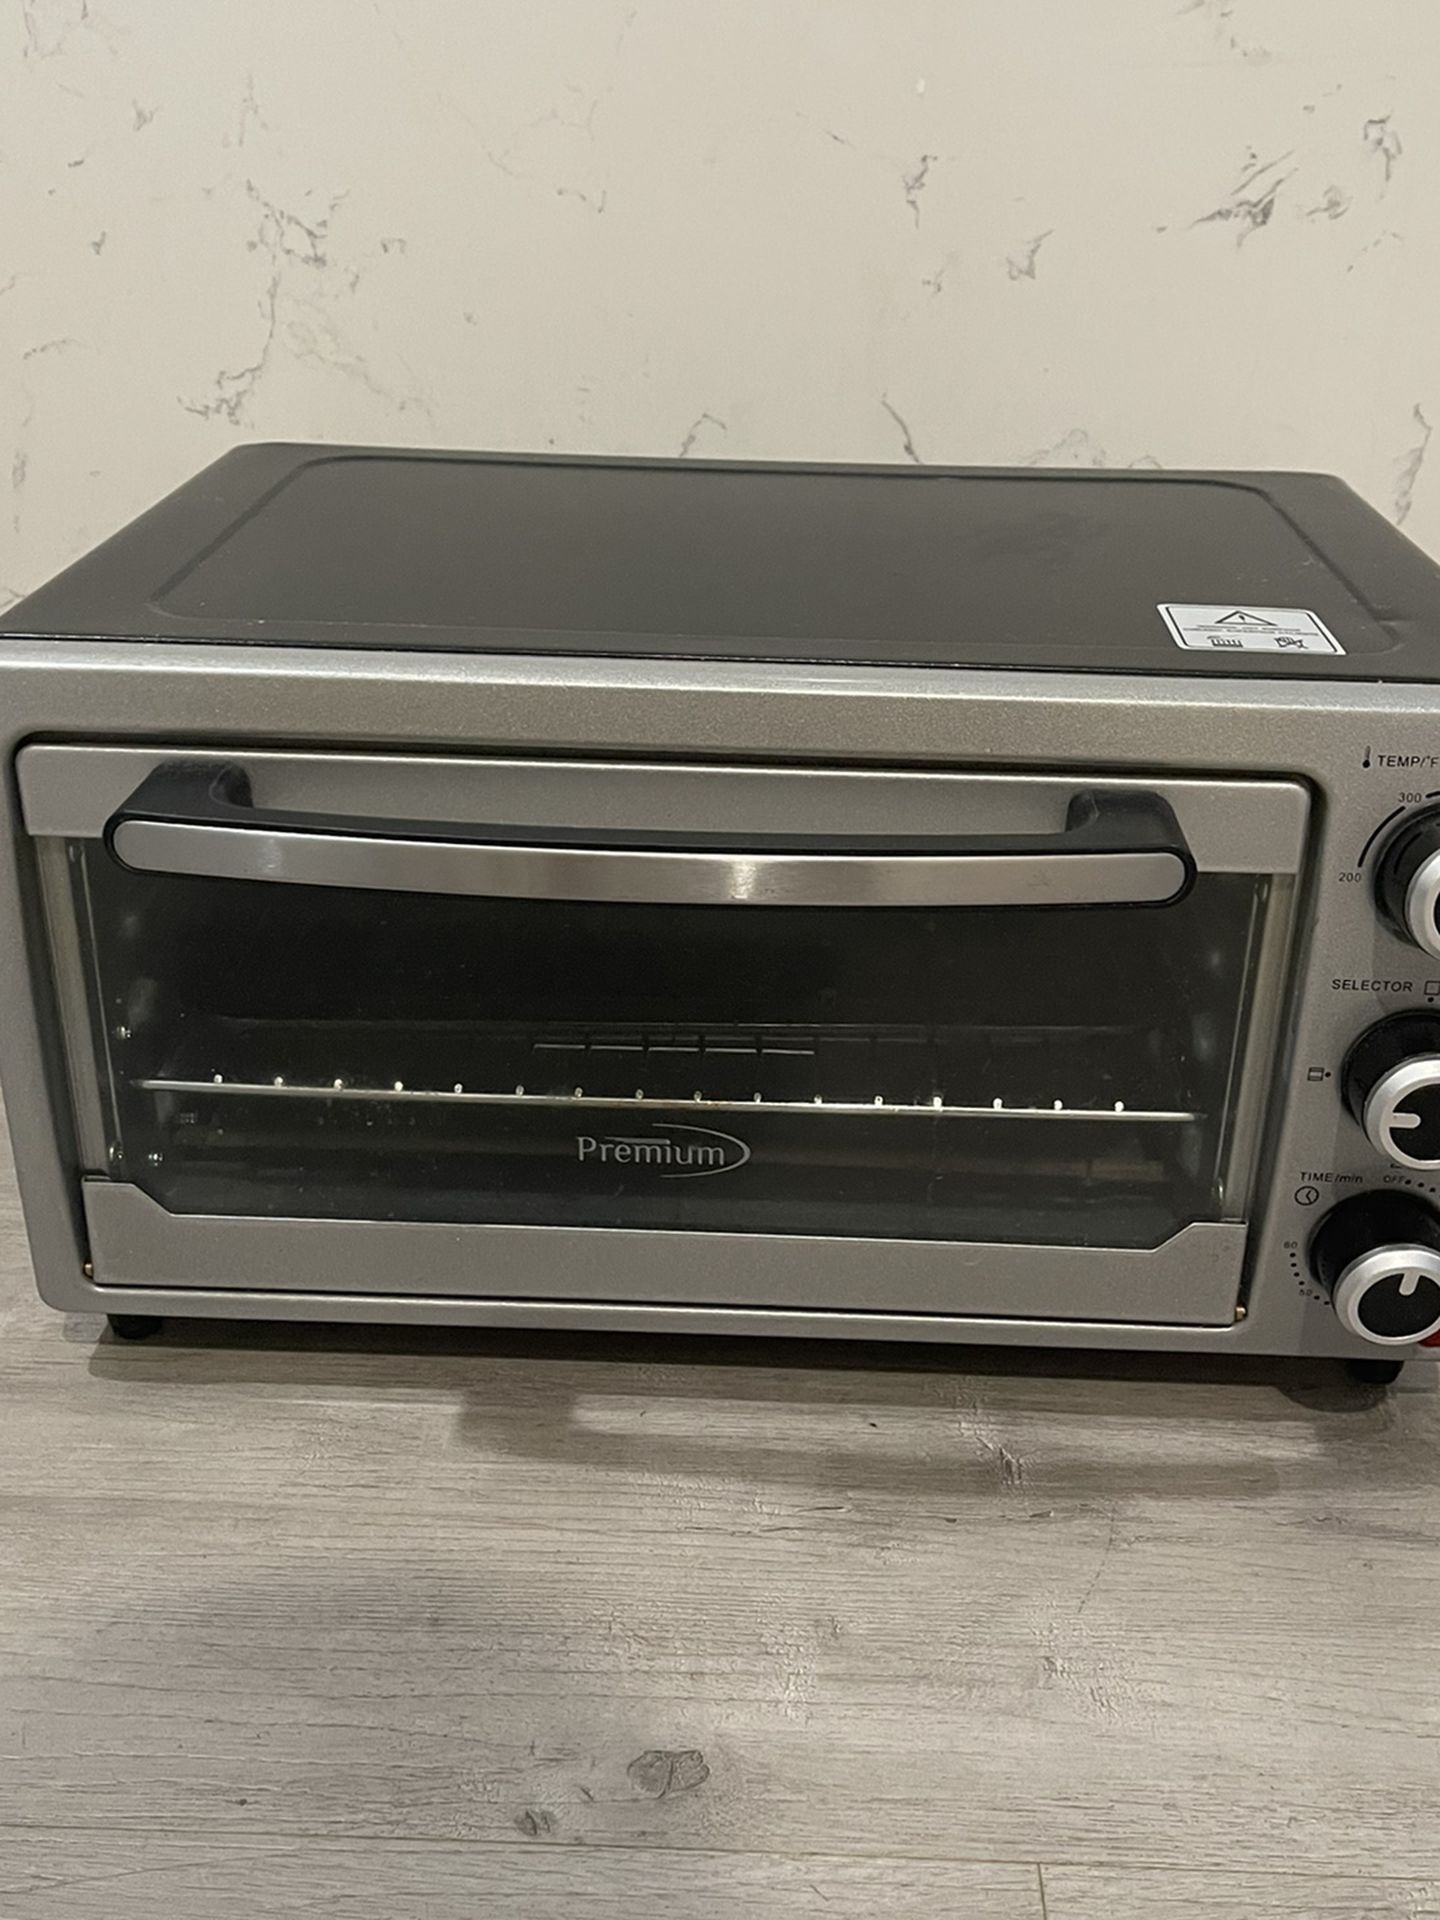 Toaster Oven Mini Oven Used